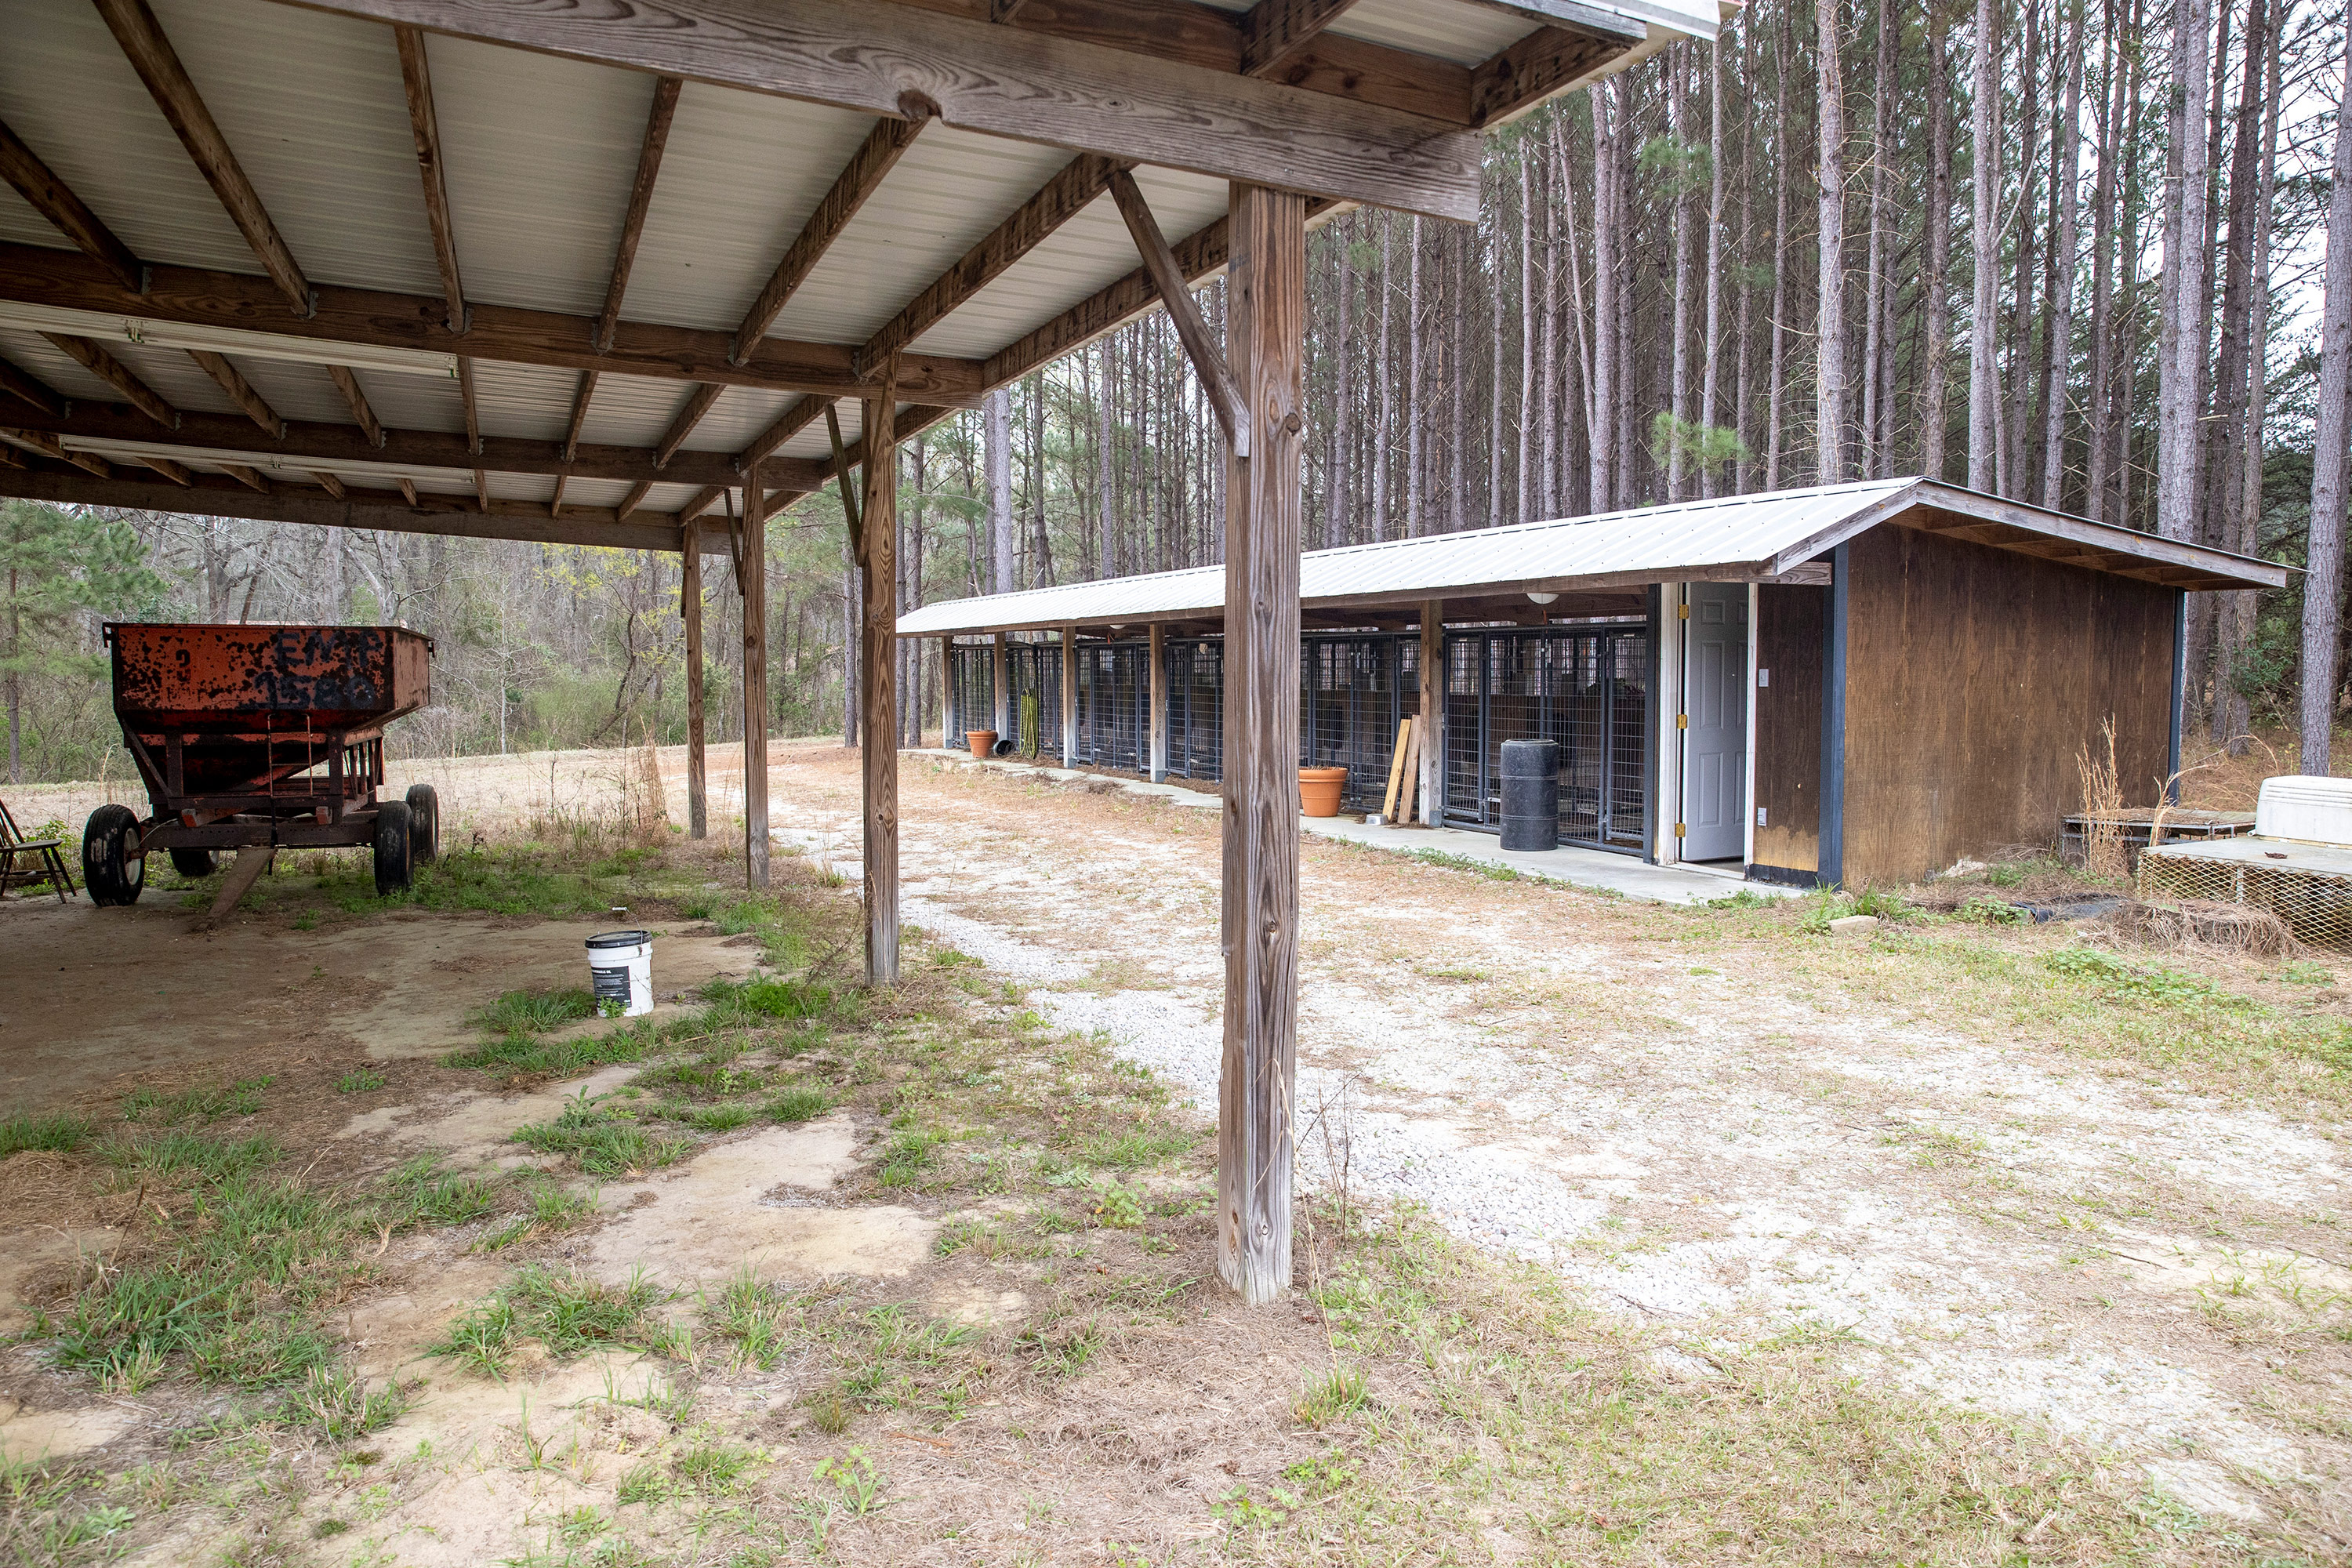 The hanger and dog kennels where Paul and Maggie’s bodies were found at the Murdaugh’s Moselle property in Islandton, South Carolina. 